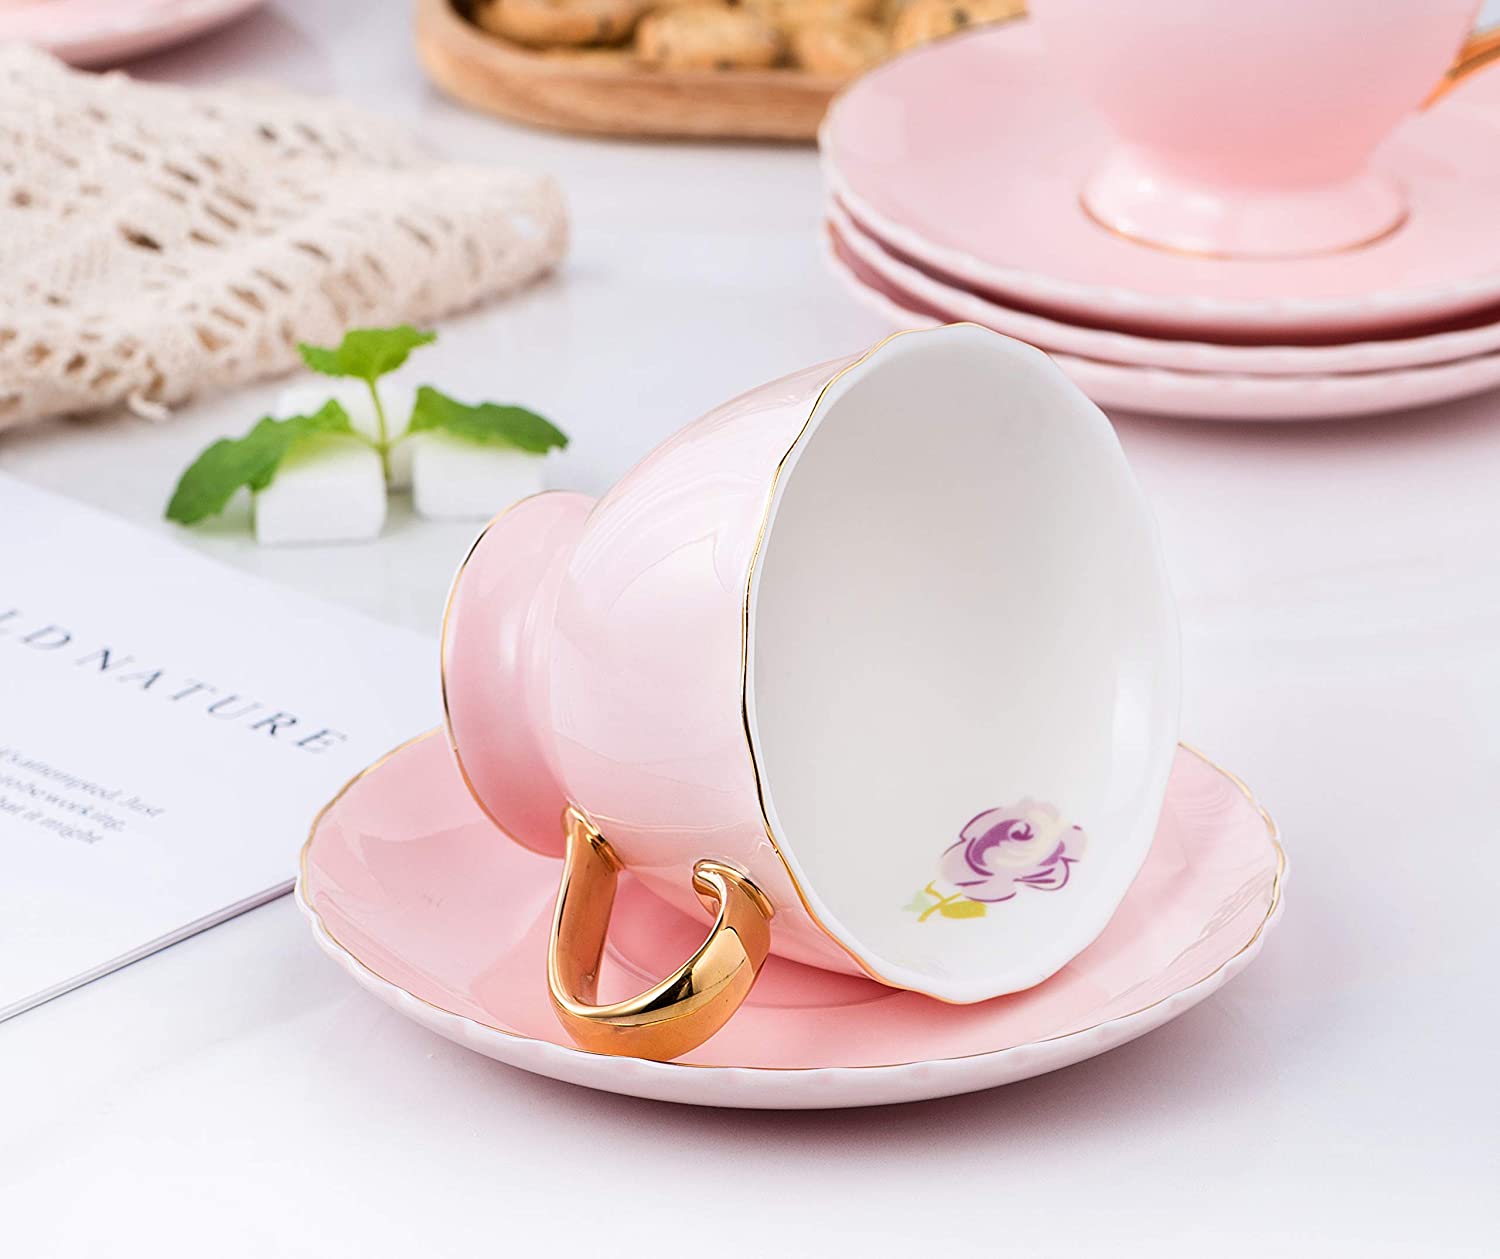 Amazingware Royal Tea Cups and Saucers, with Gold Trim and Gift Box,  British Coffee Cups, Porcelain Tea Set, Set of 6 (8 oz)- Pink